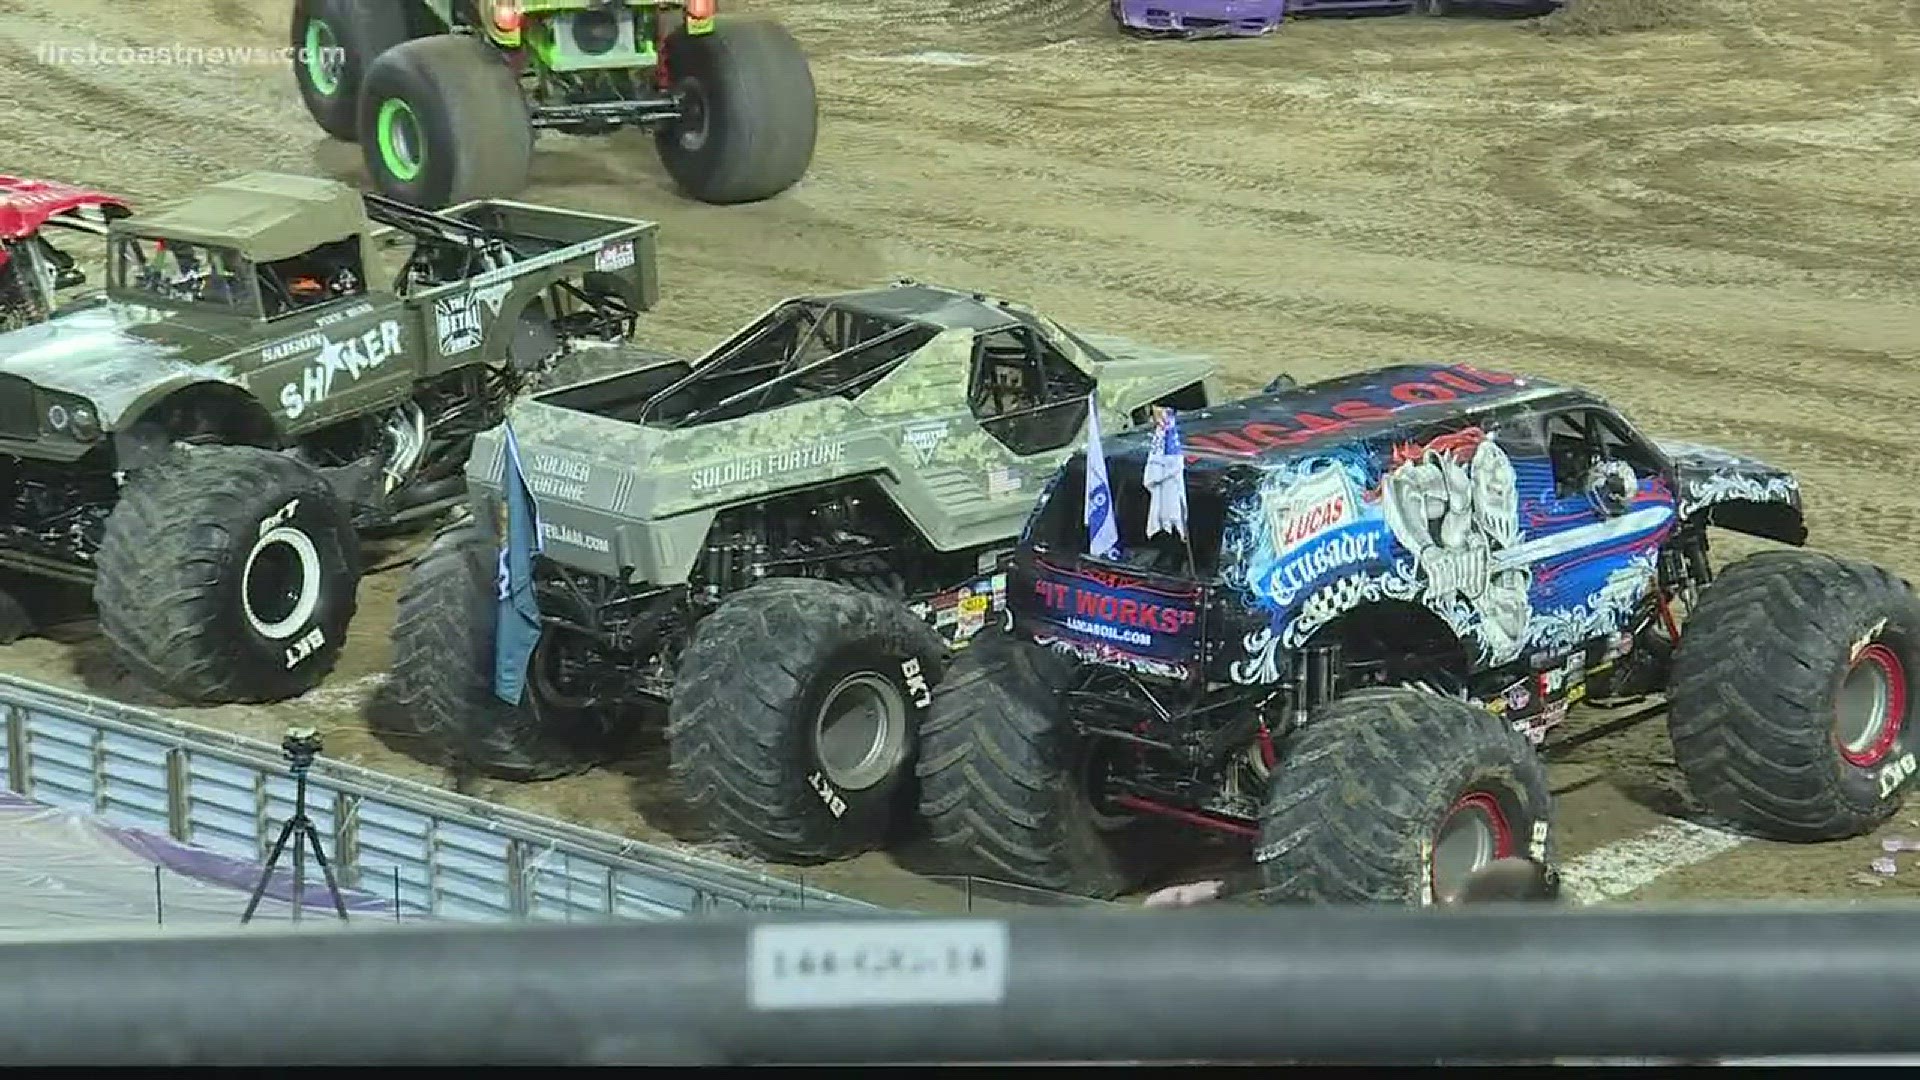 FCN's Nick Perreault has the latest on Saturday's event that brought the rough and tumble of monster trucks to EverBank Field.